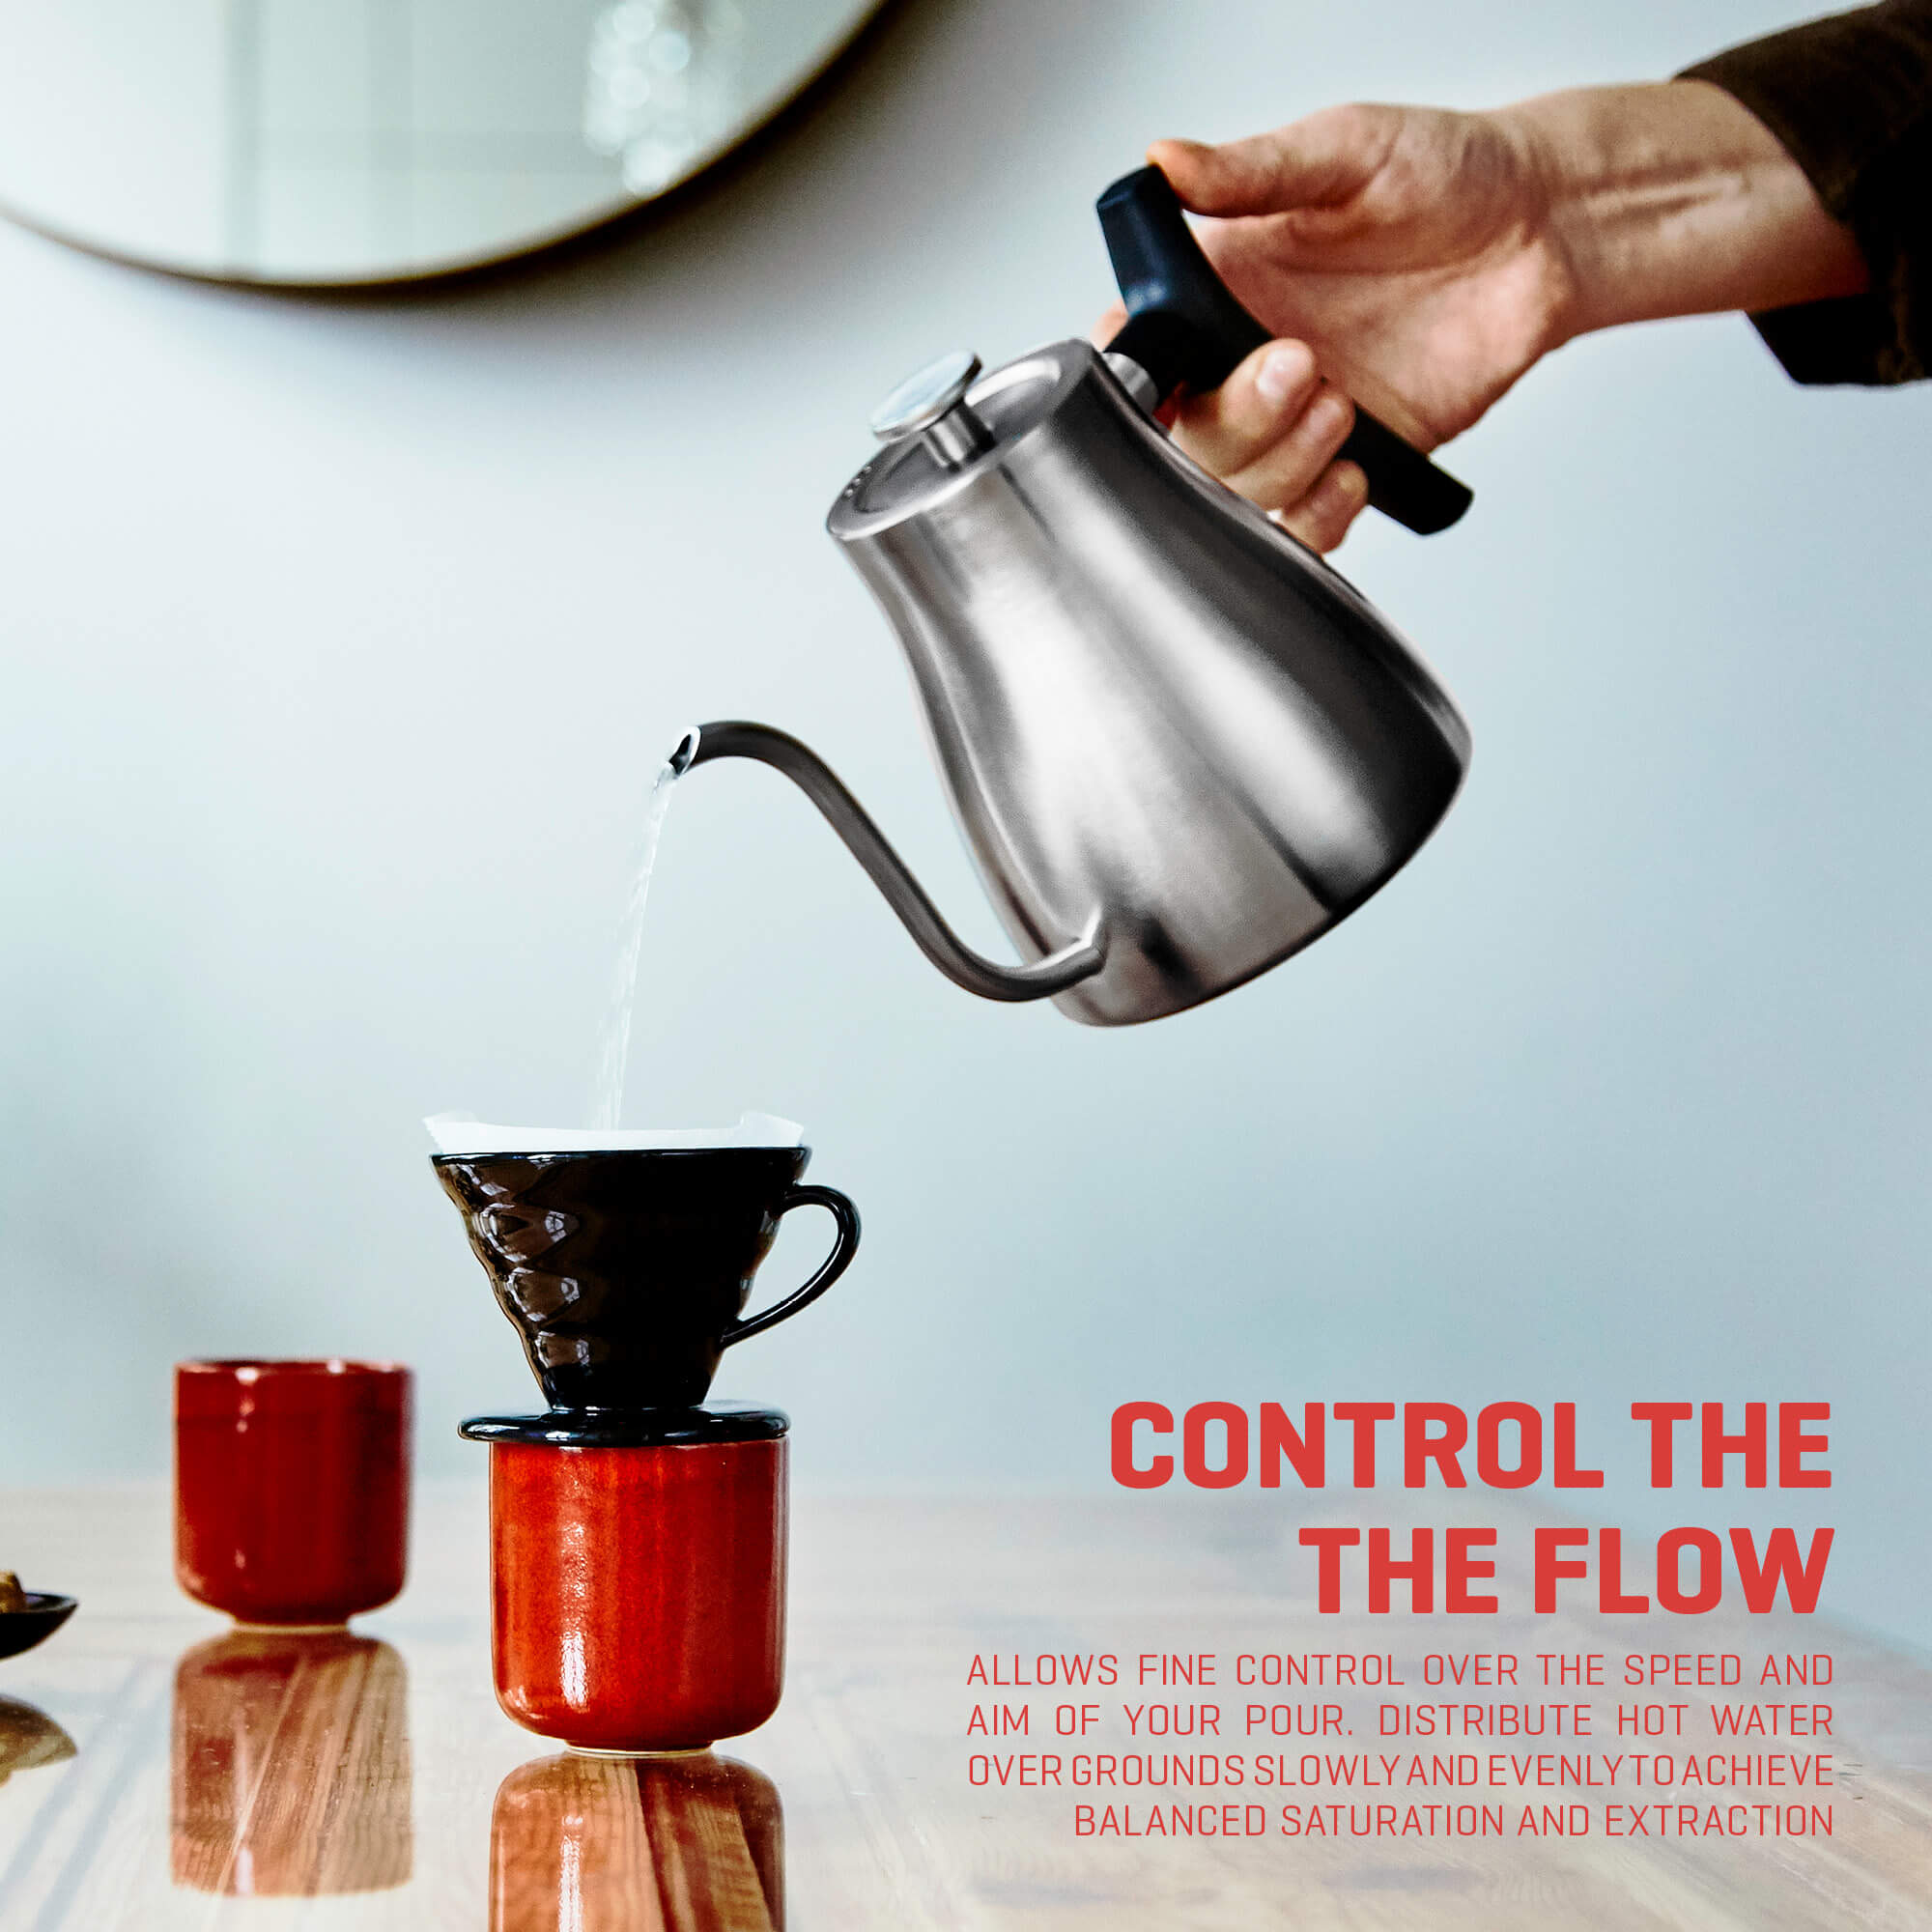 Tea drinker? This temperature-controlled kettle is 20% off - The